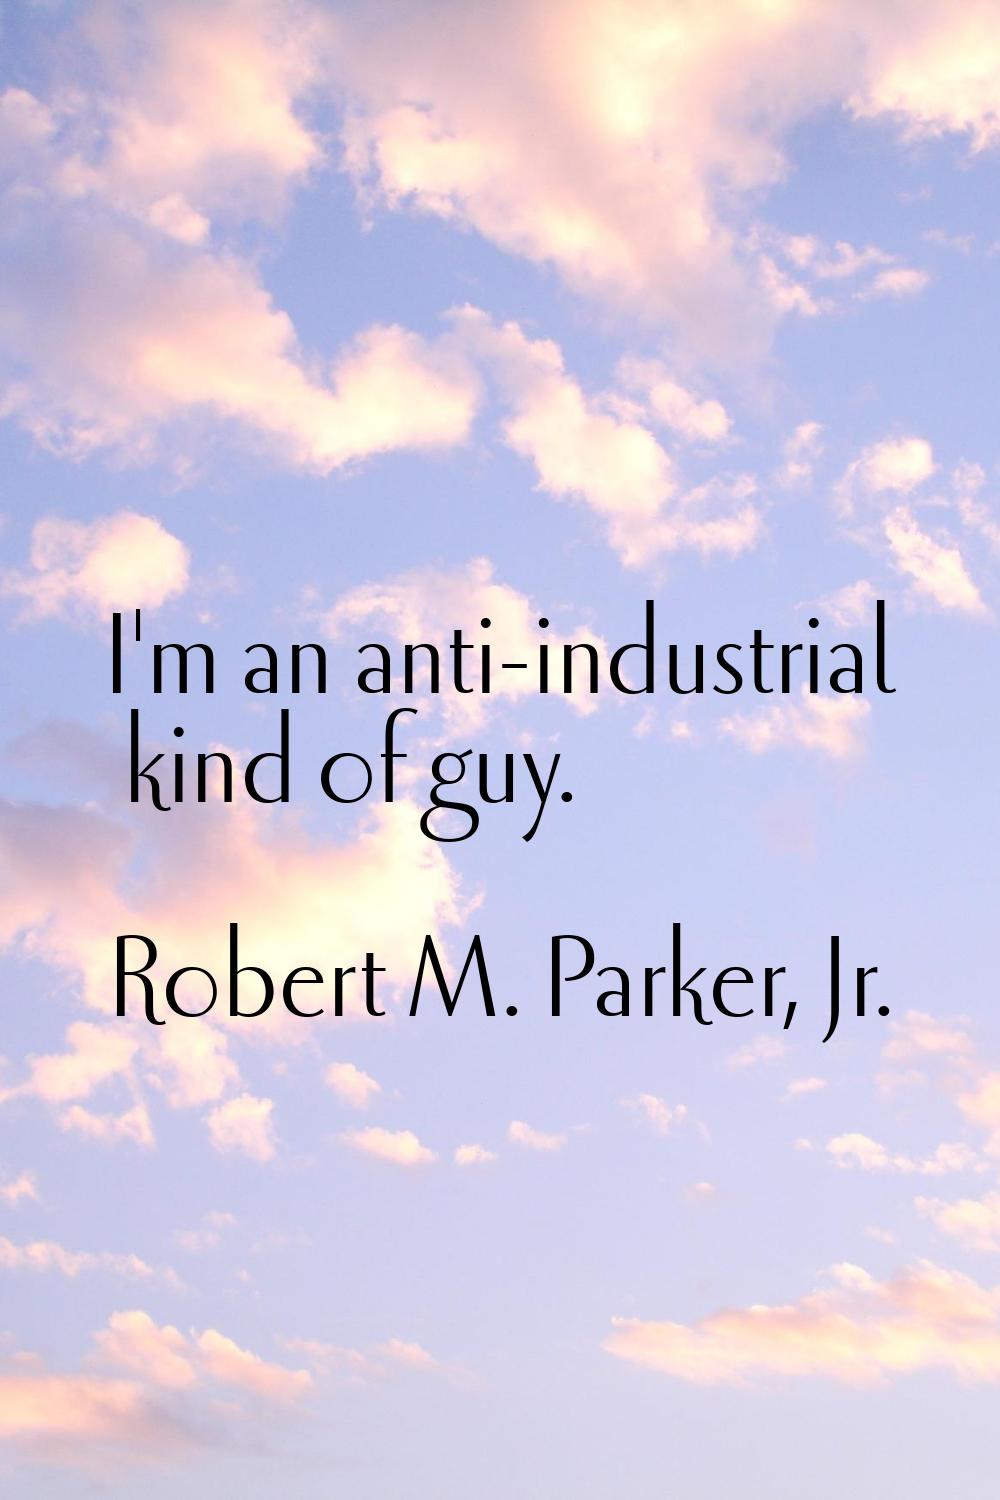 I'm an anti-industrial kind of guy.